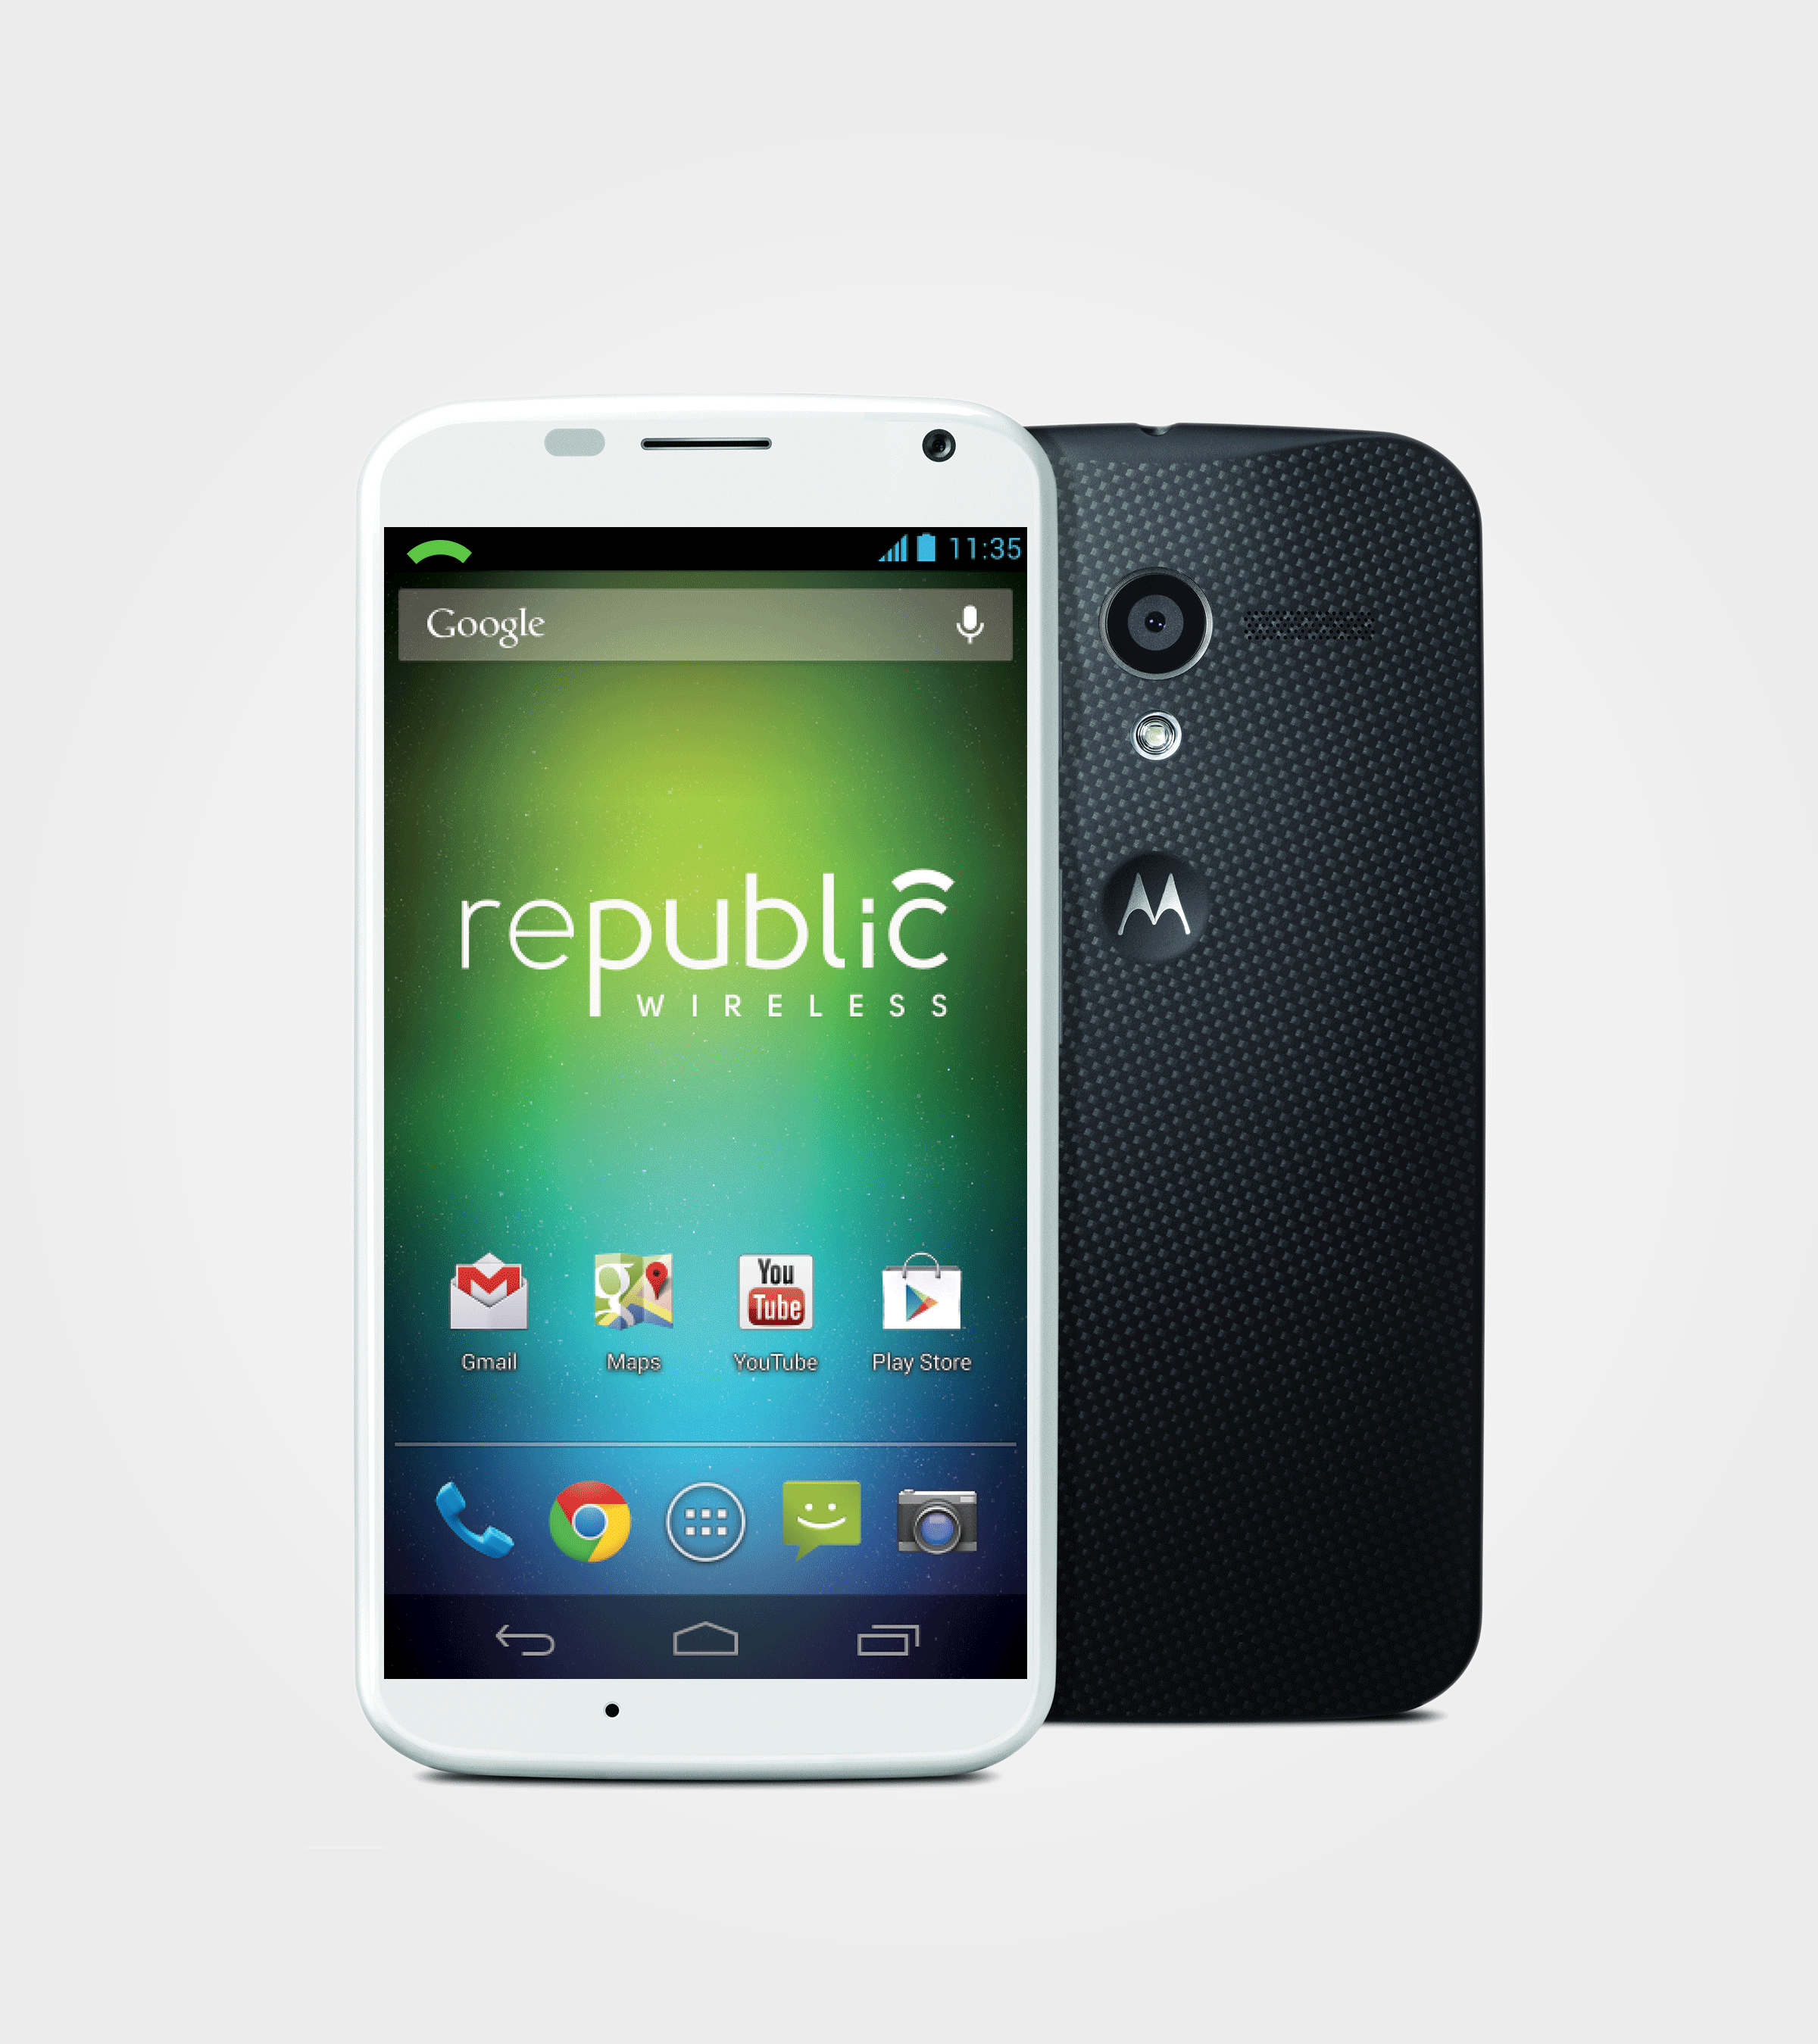 A smarter smartphone: The Moto X for Republic Wireless uses both Wi-Fi and cellular Hybrid Calling to keep service costs low.